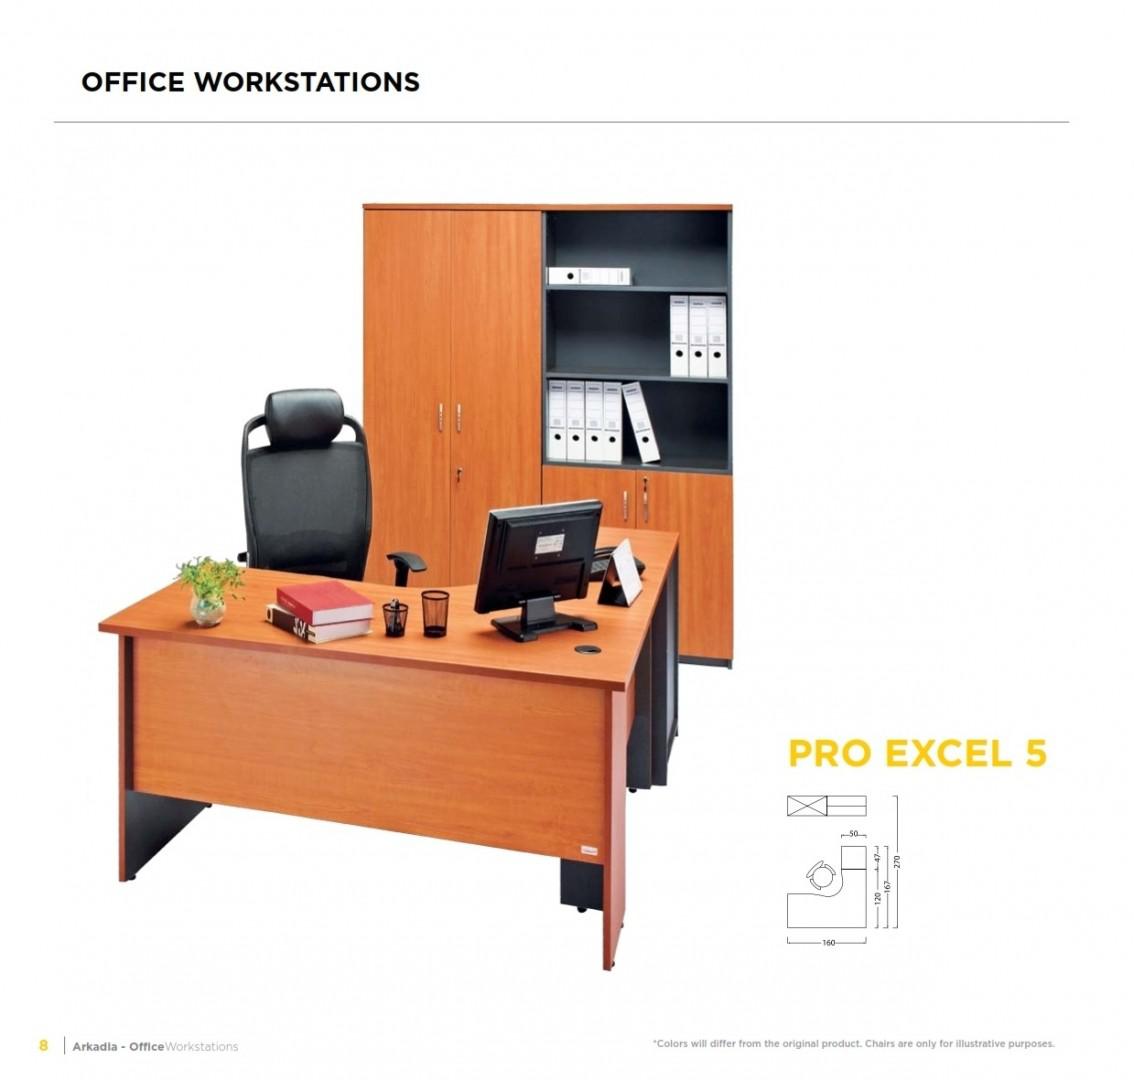 Pro Excel 5 from Arkadia Furniture